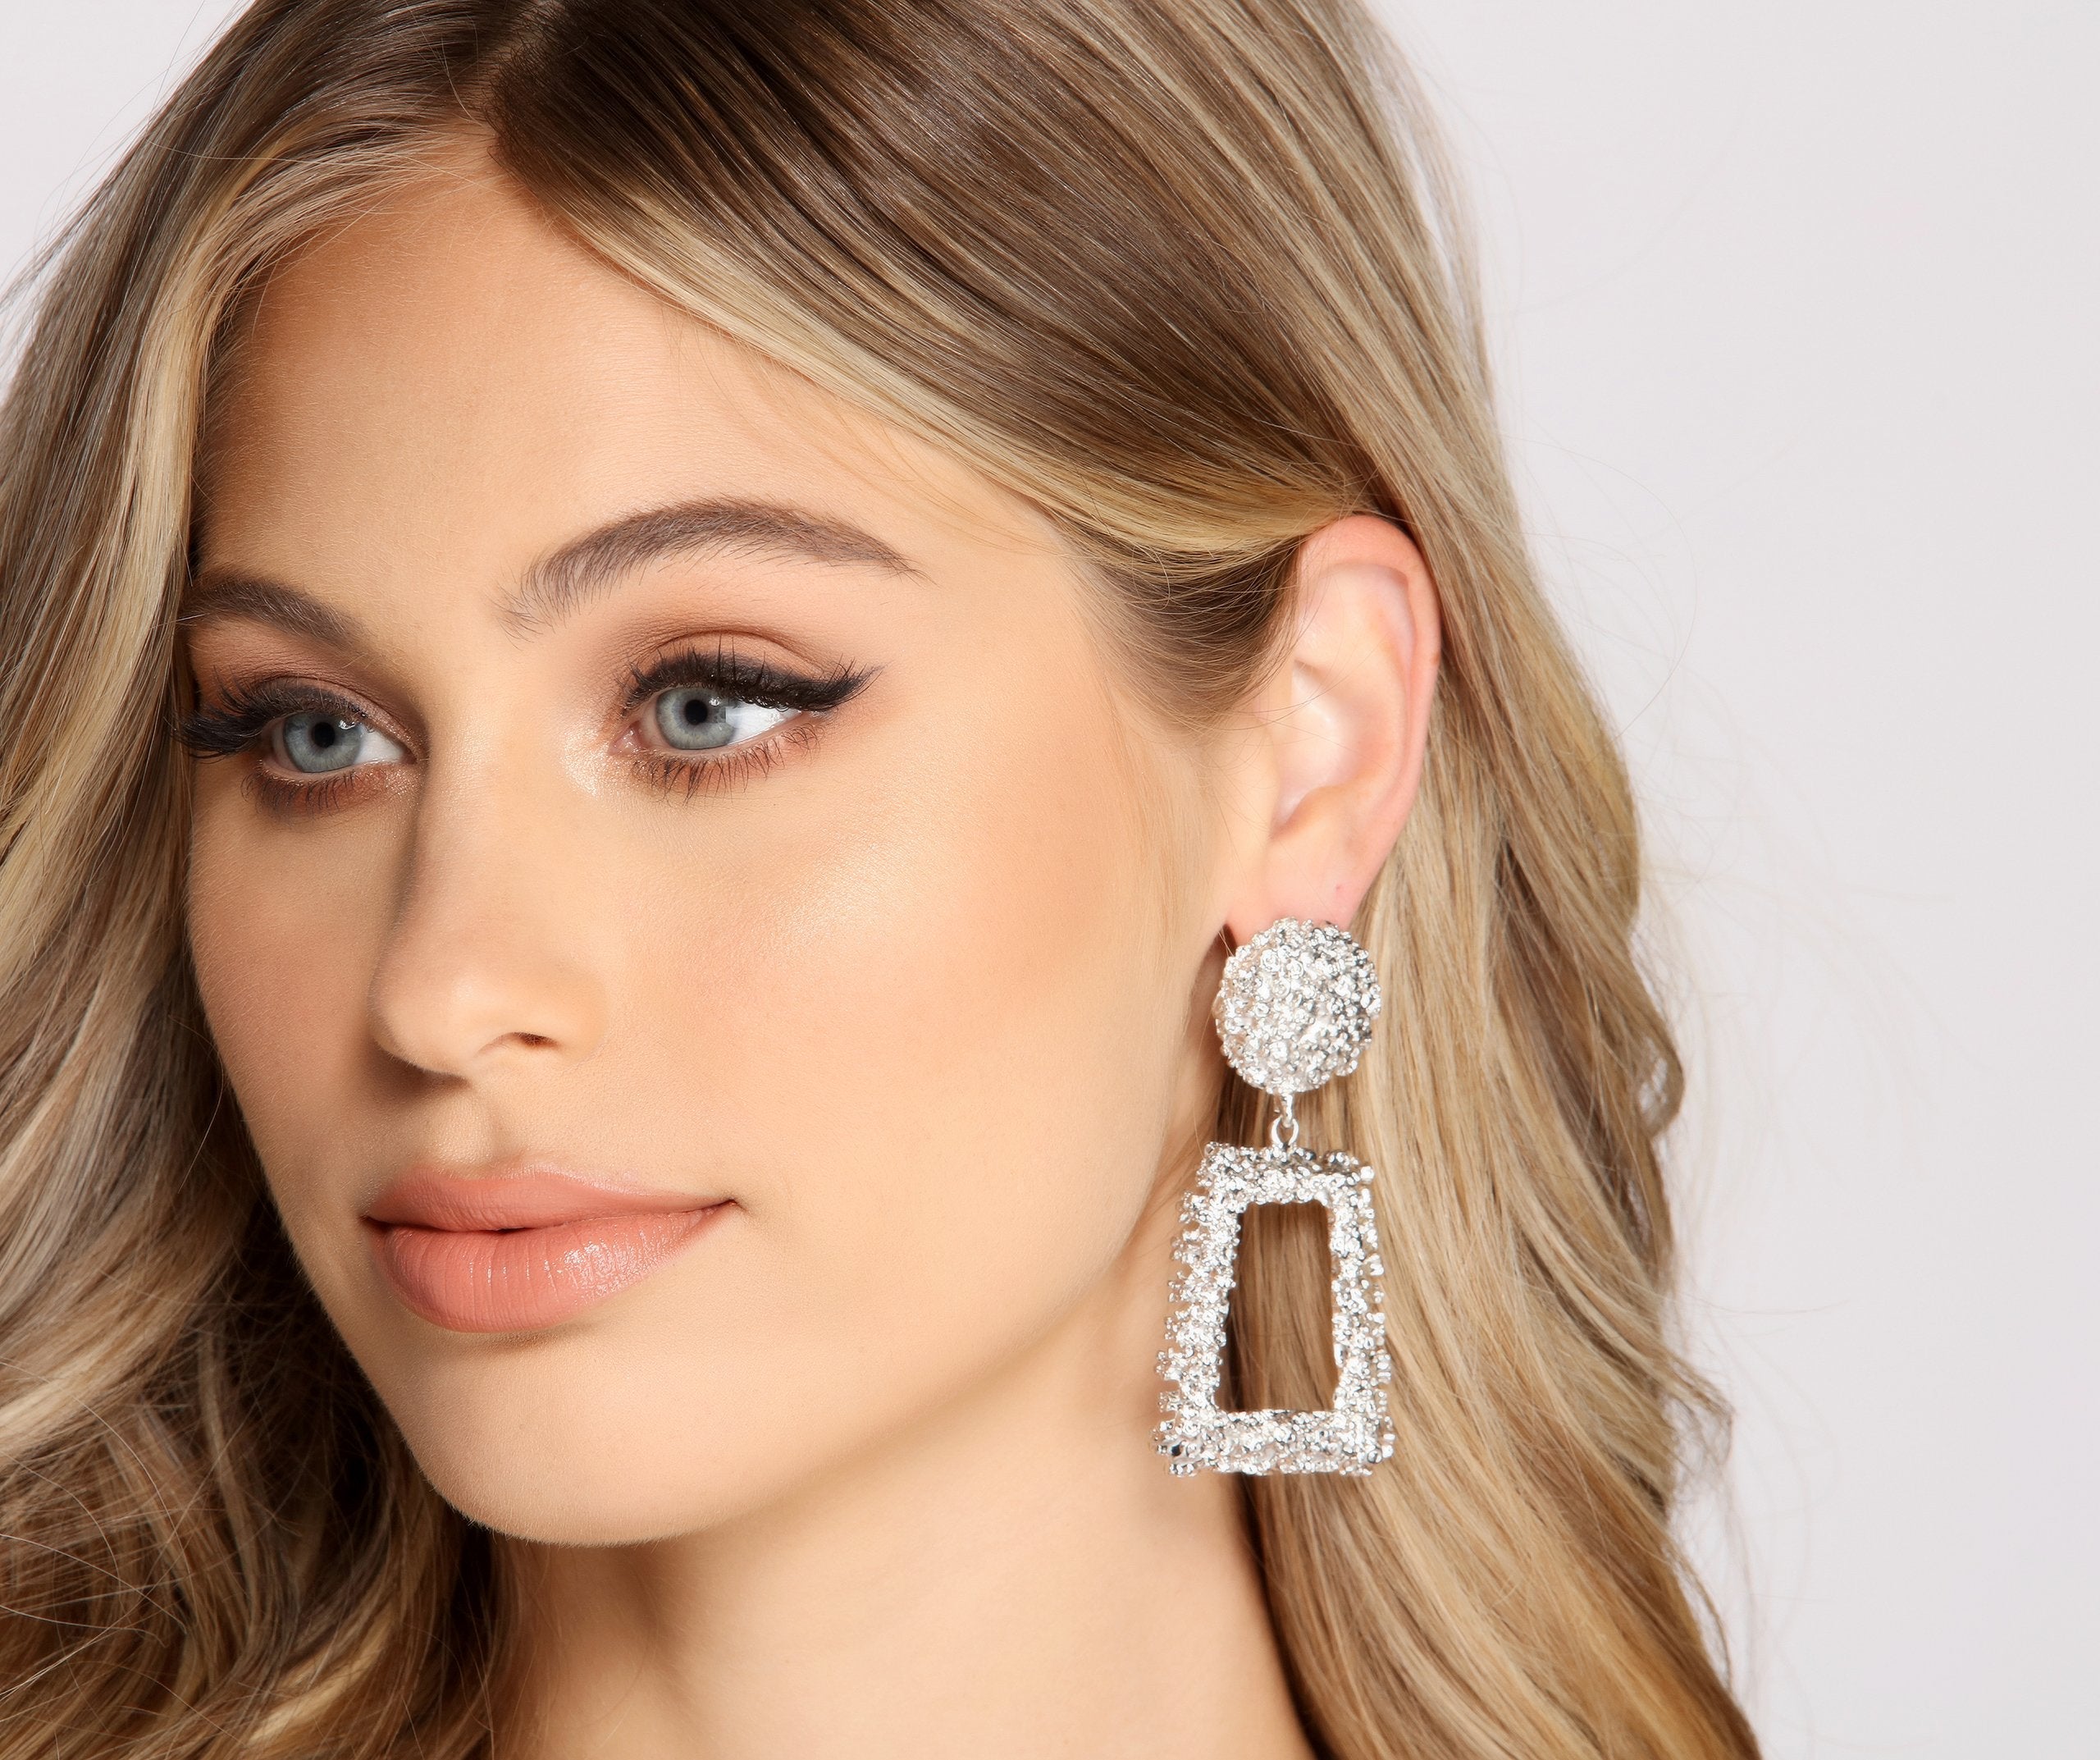 Glam Moment Textured Earrings - Lady Occasions